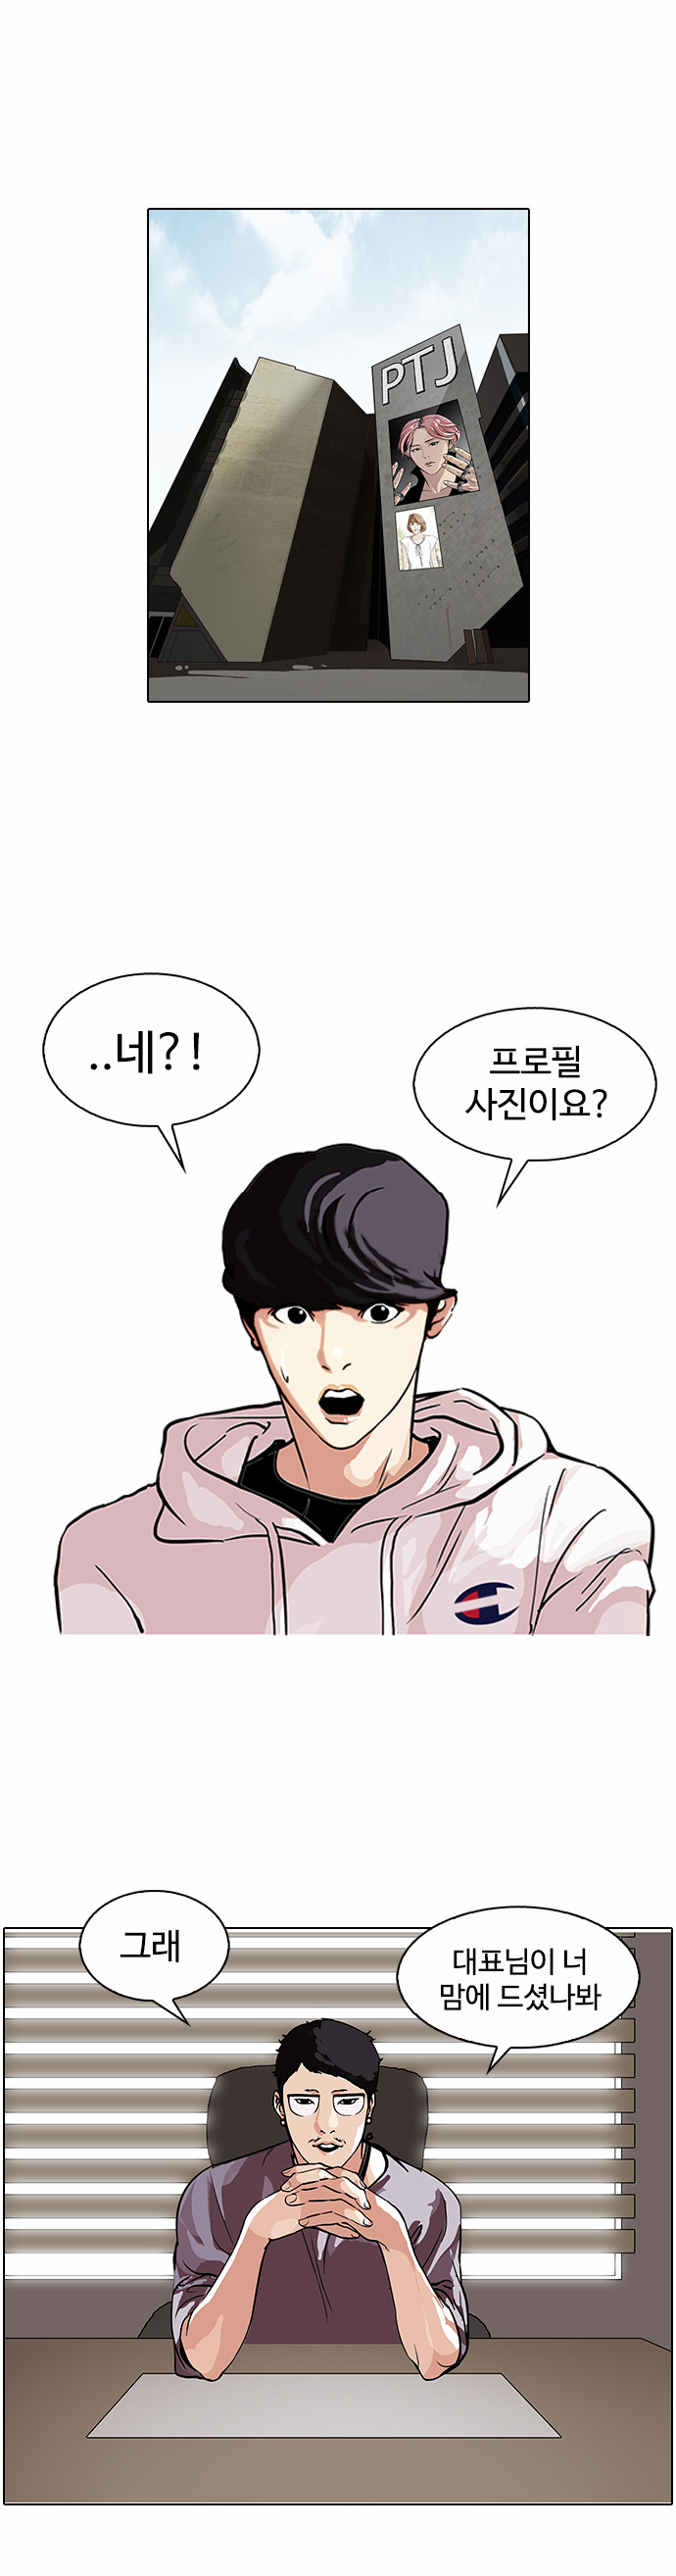 Lookism - Chapter 102 - Page 1